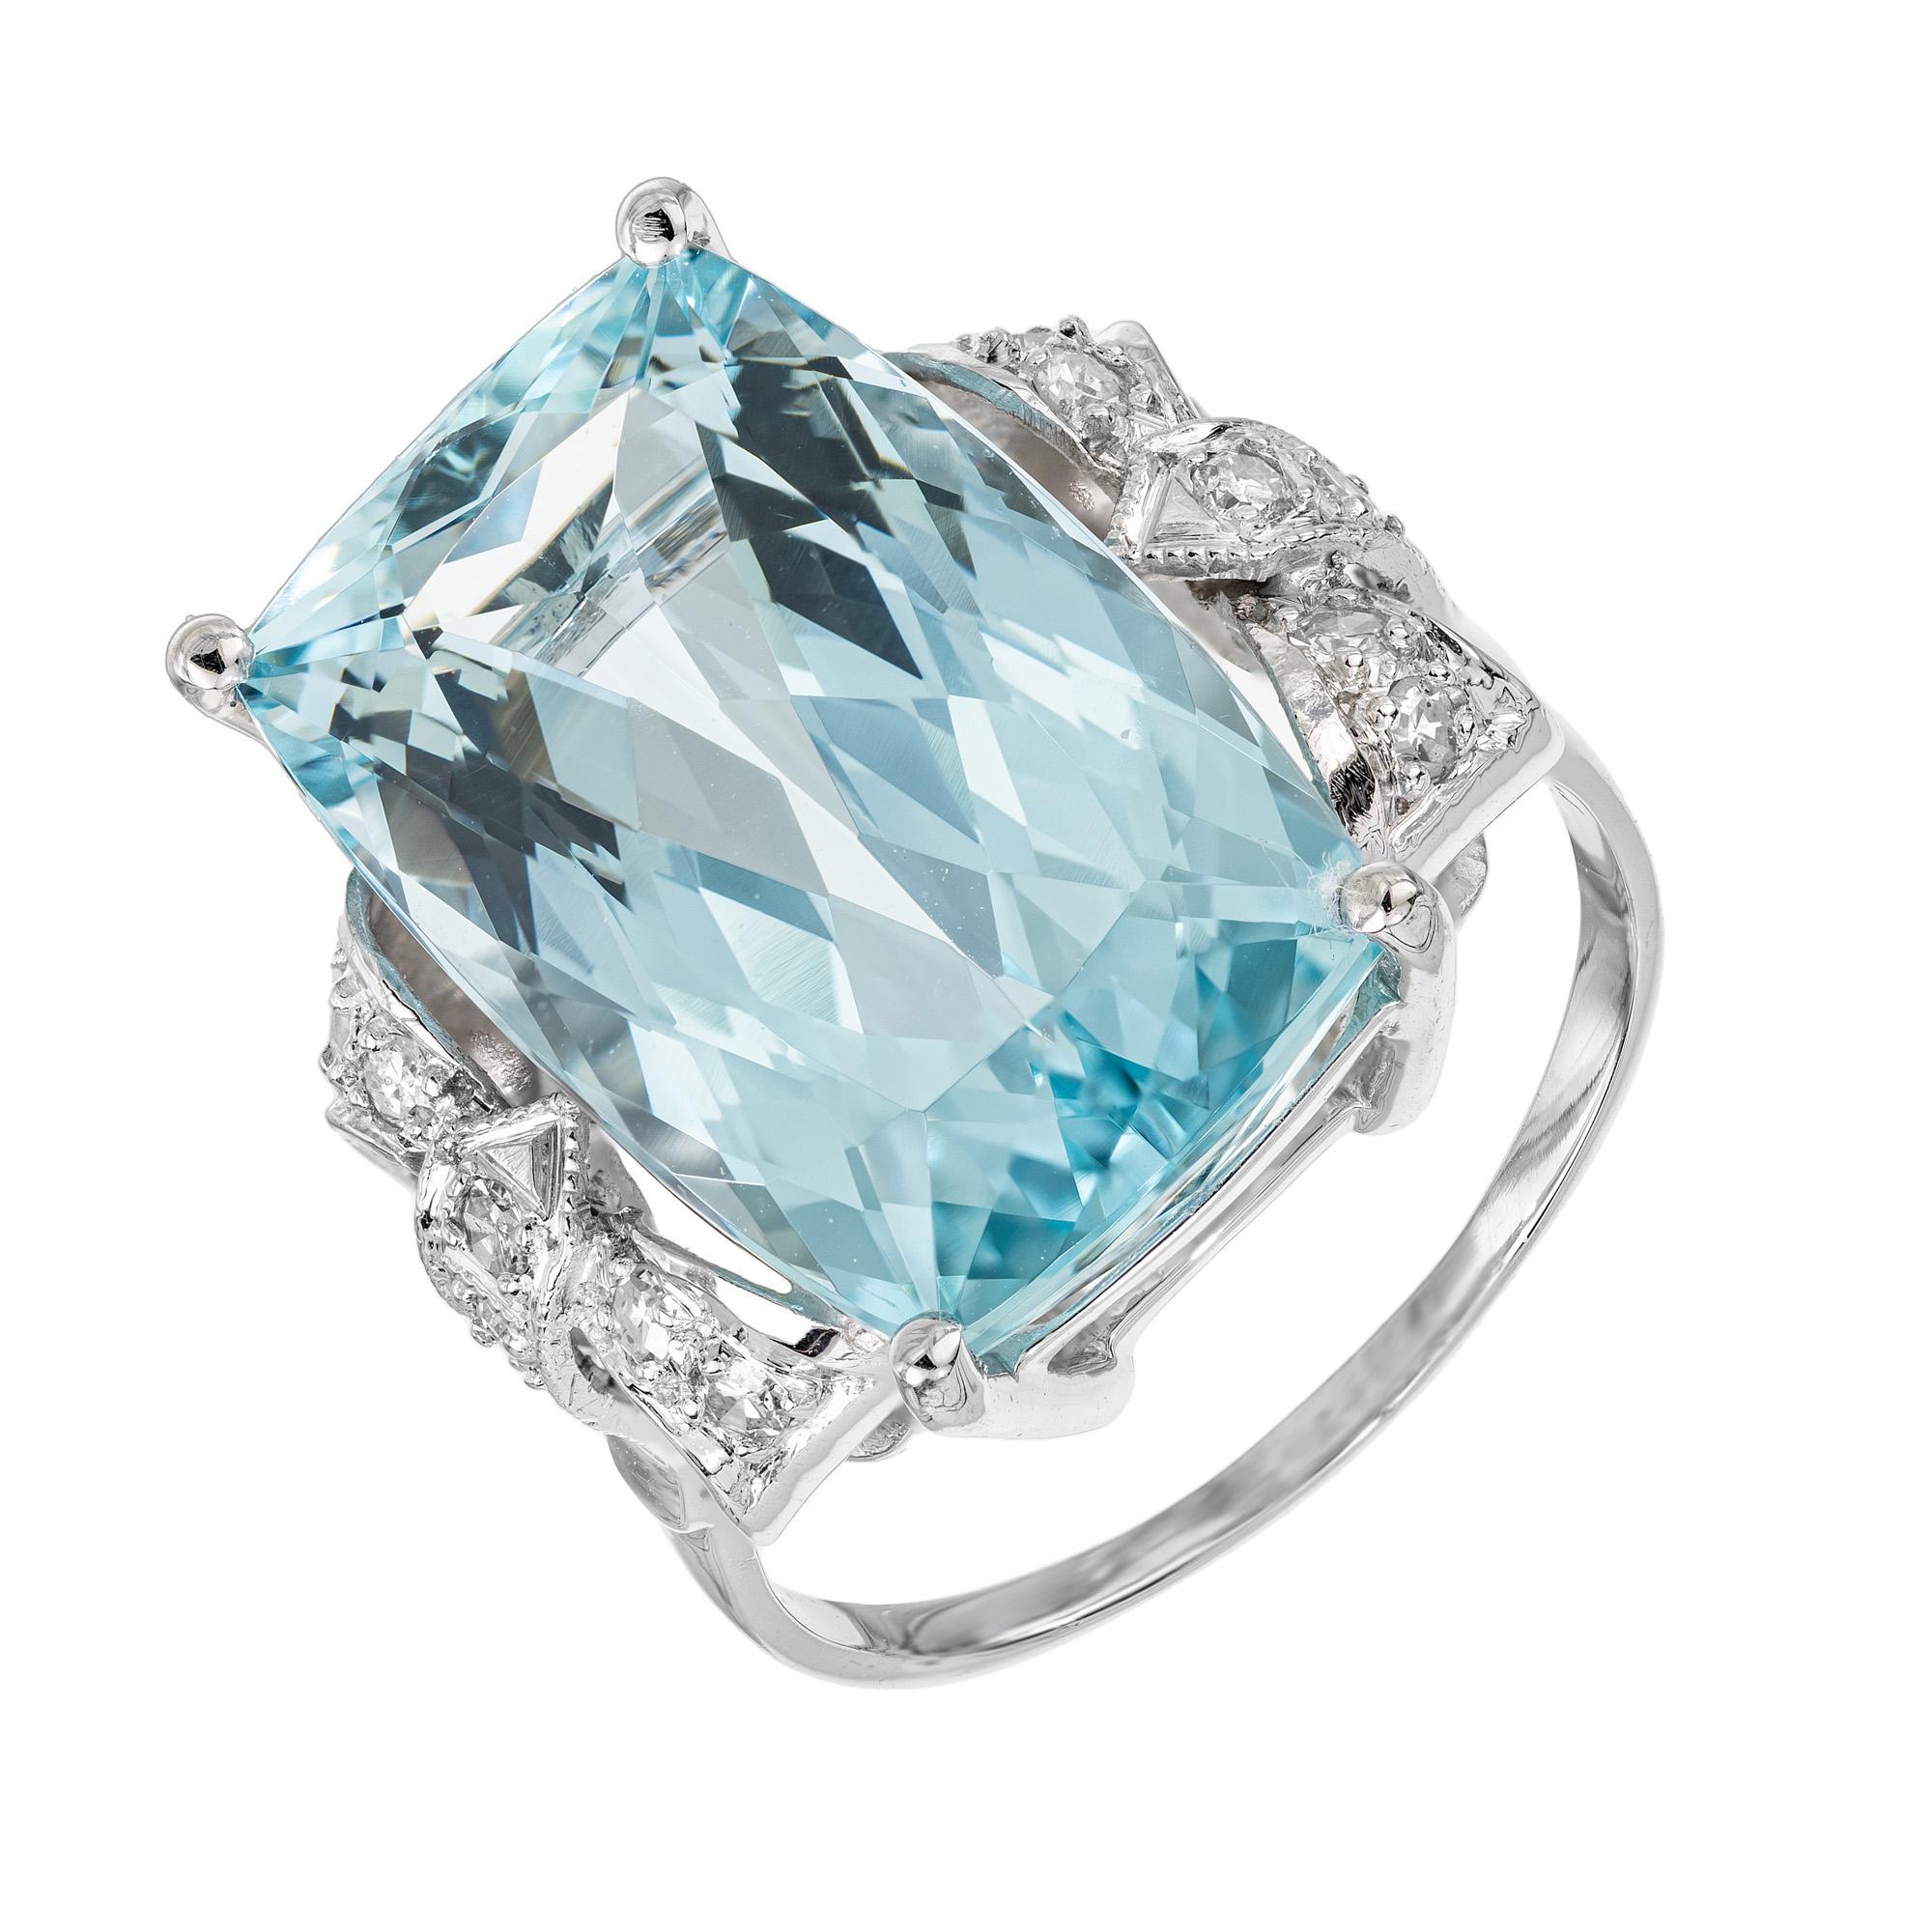 This exquisite 1940's ring features a mesmerizing 10.35 carat cushion cut aquamarine center stone. Mounted in a platinum bow style setting which is accented with 18 single cut diamonds. The aqua is a rich bright pale blue. The ring is a stunning